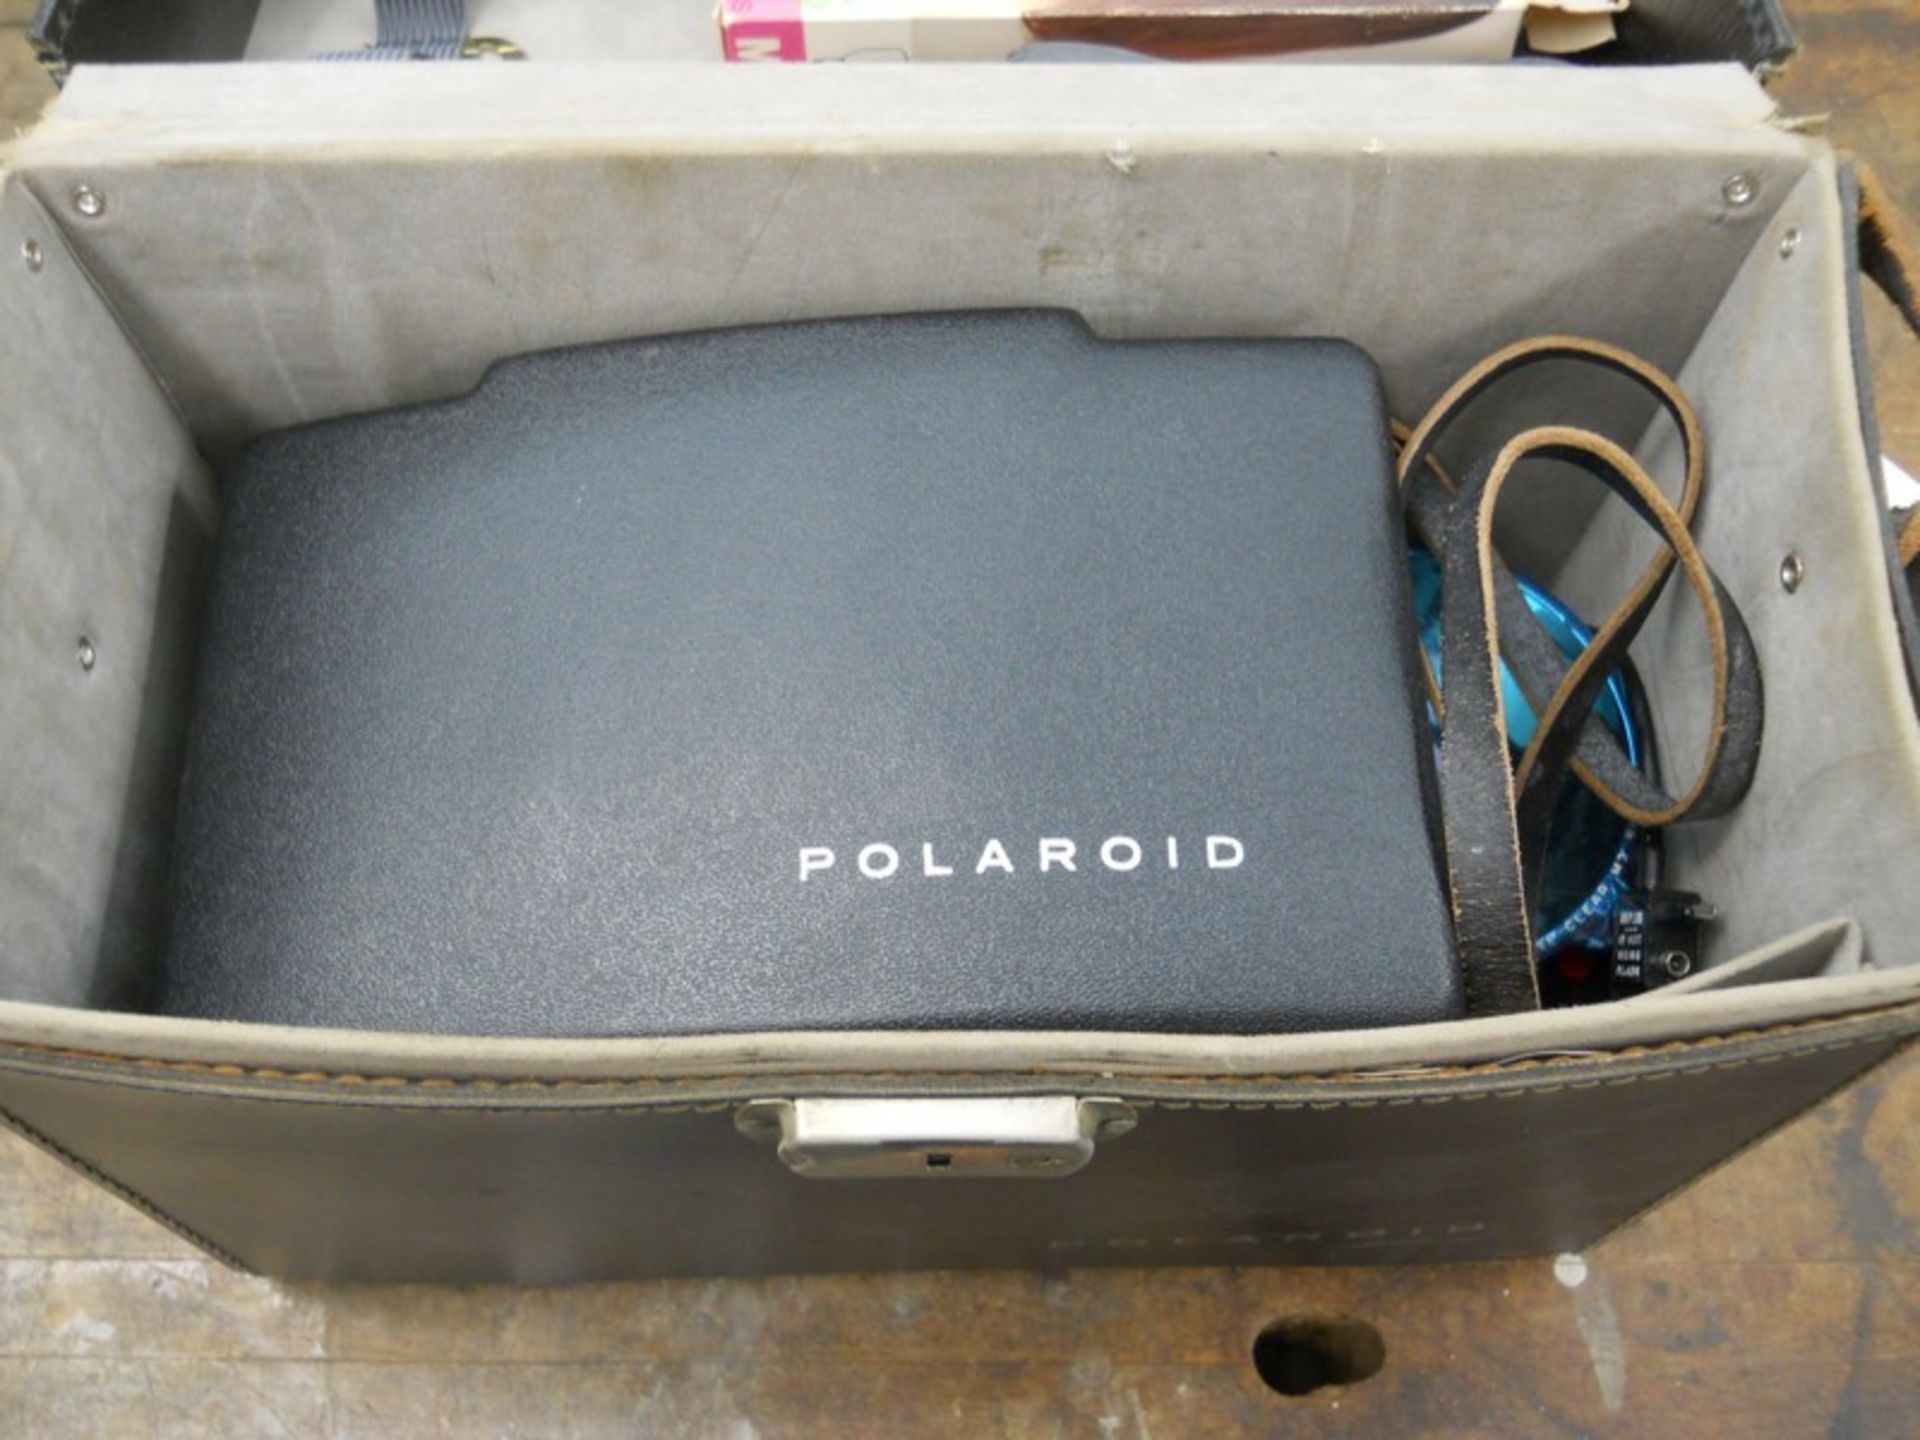 Polaroid Automatic 100 Land Camera. With Auxiliary Flash Unit, Carrying Case - Image 8 of 9